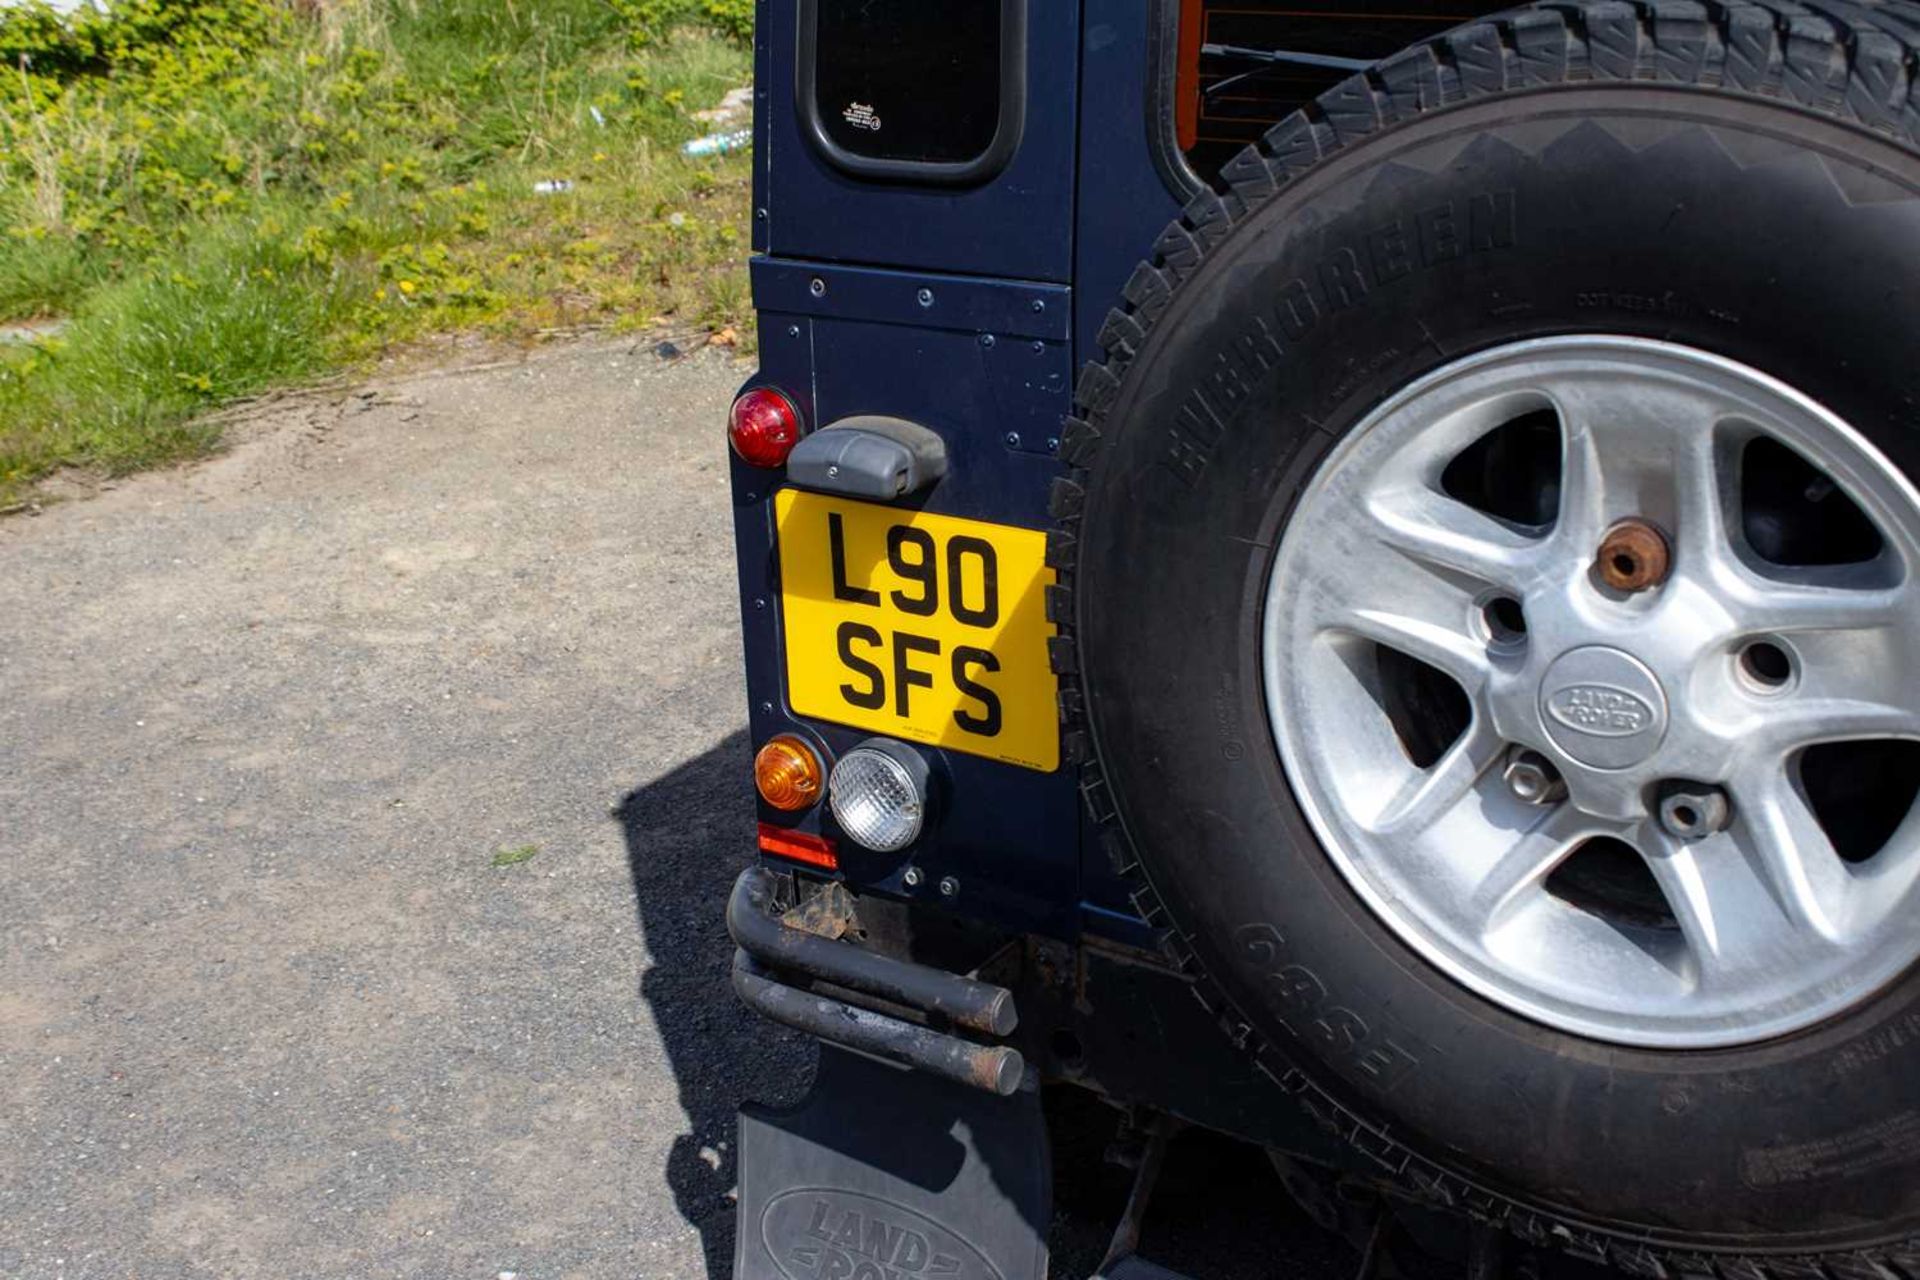 2007 Land Rover Defender 90 County  Powered by the 2.4-litre TDCi unit and features numerous tastefu - Image 33 of 76